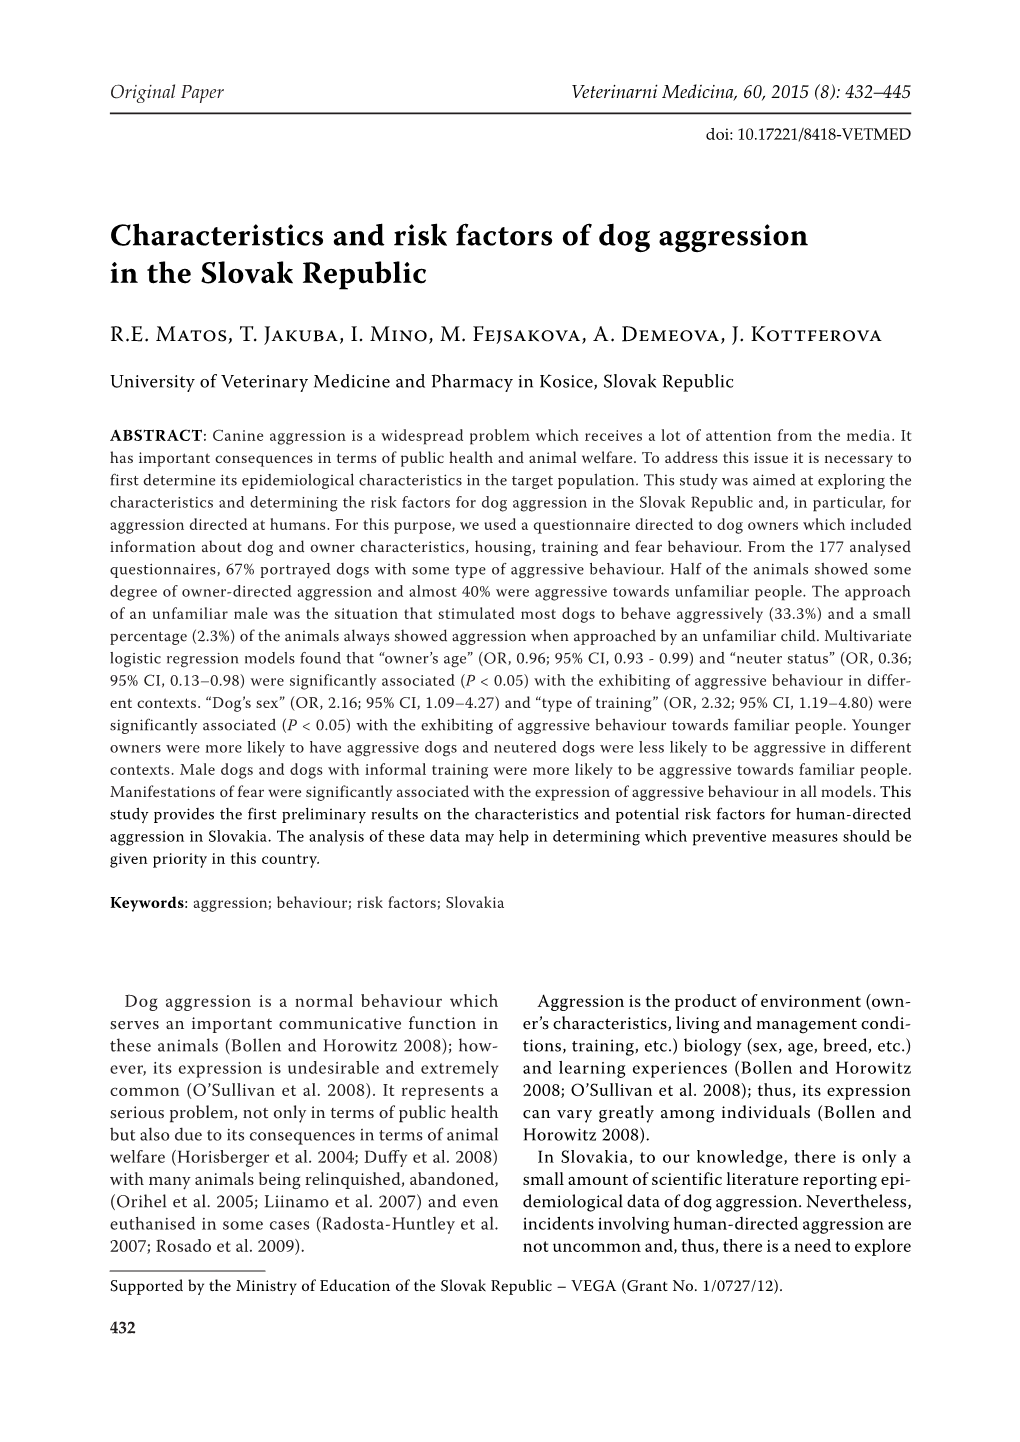 Characteristics and Risk Factors of Dog Aggression in the Slovak Republic